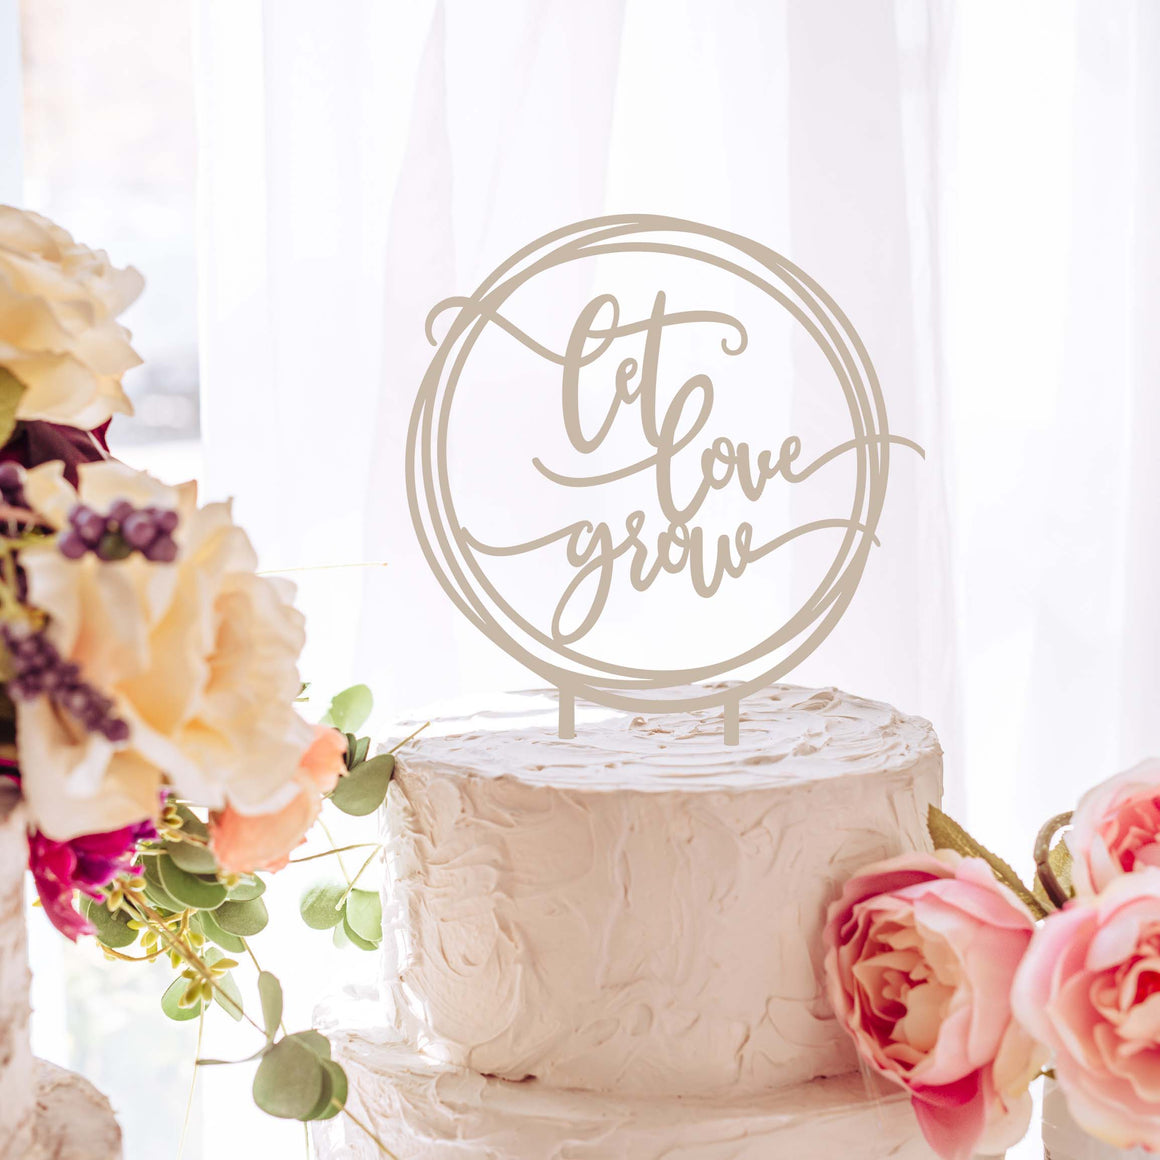 let love grow cake topper at a bridal shower with cake florals